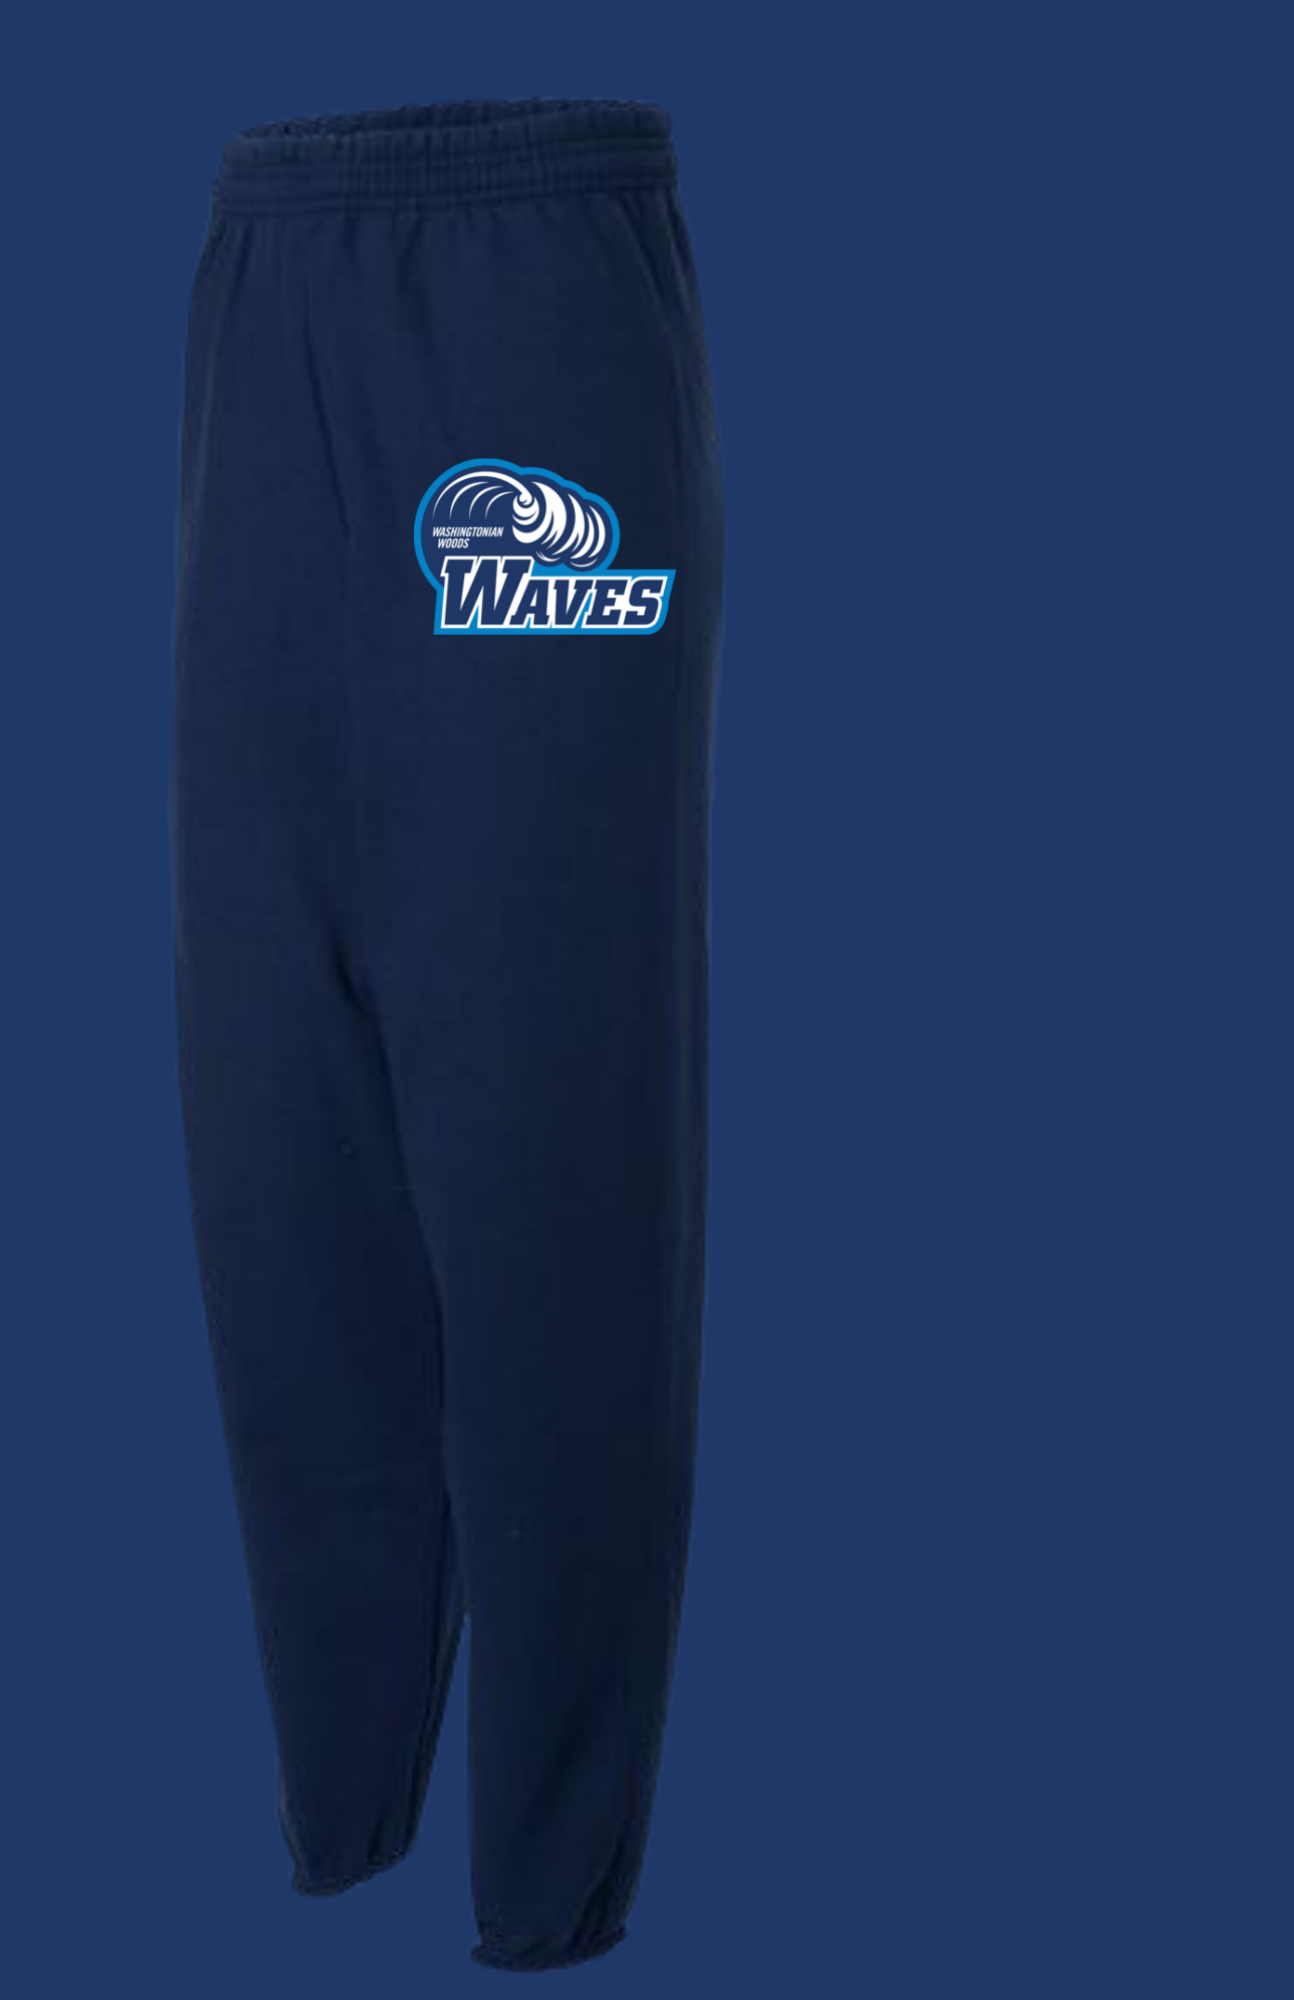 Adult and Youth Navy Sweatpant